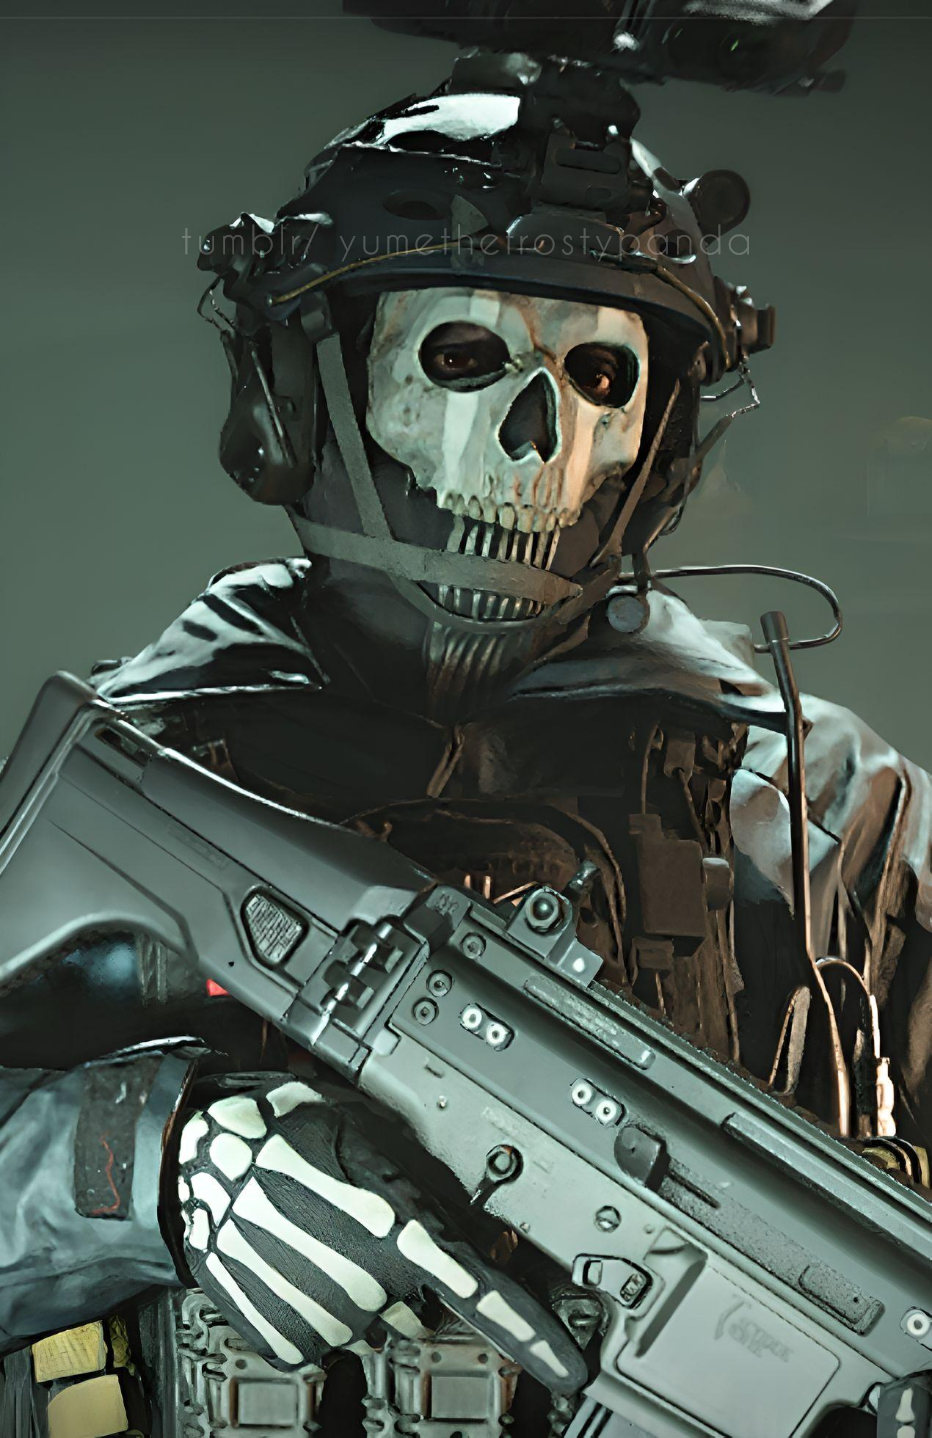 Ghost From COD:MWII lieutenant Simon ghost Riley 